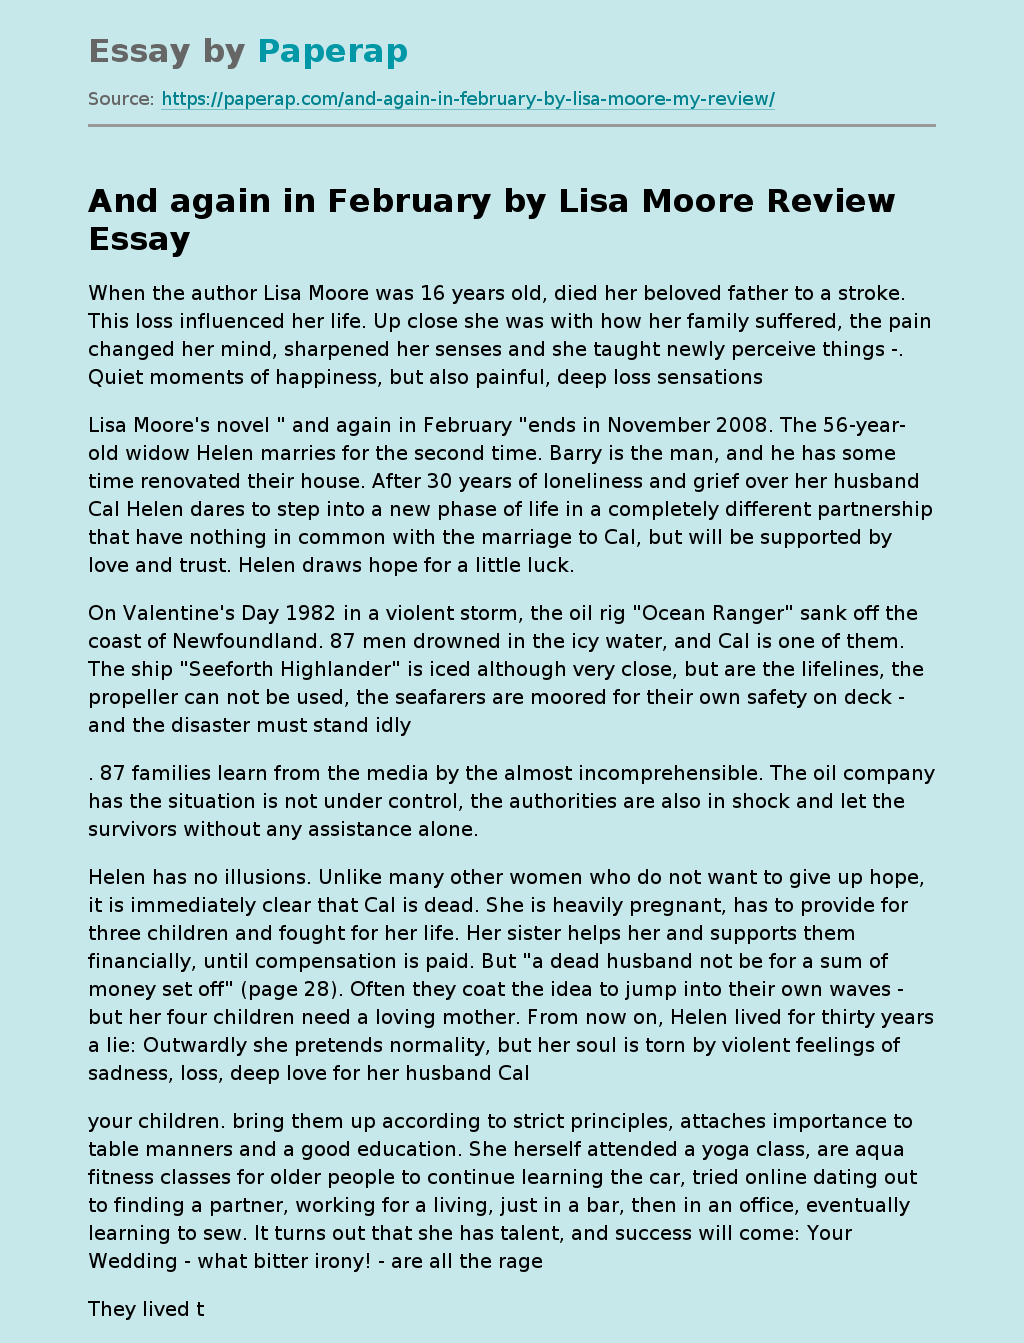 “And Again in February” by Lisa Moore